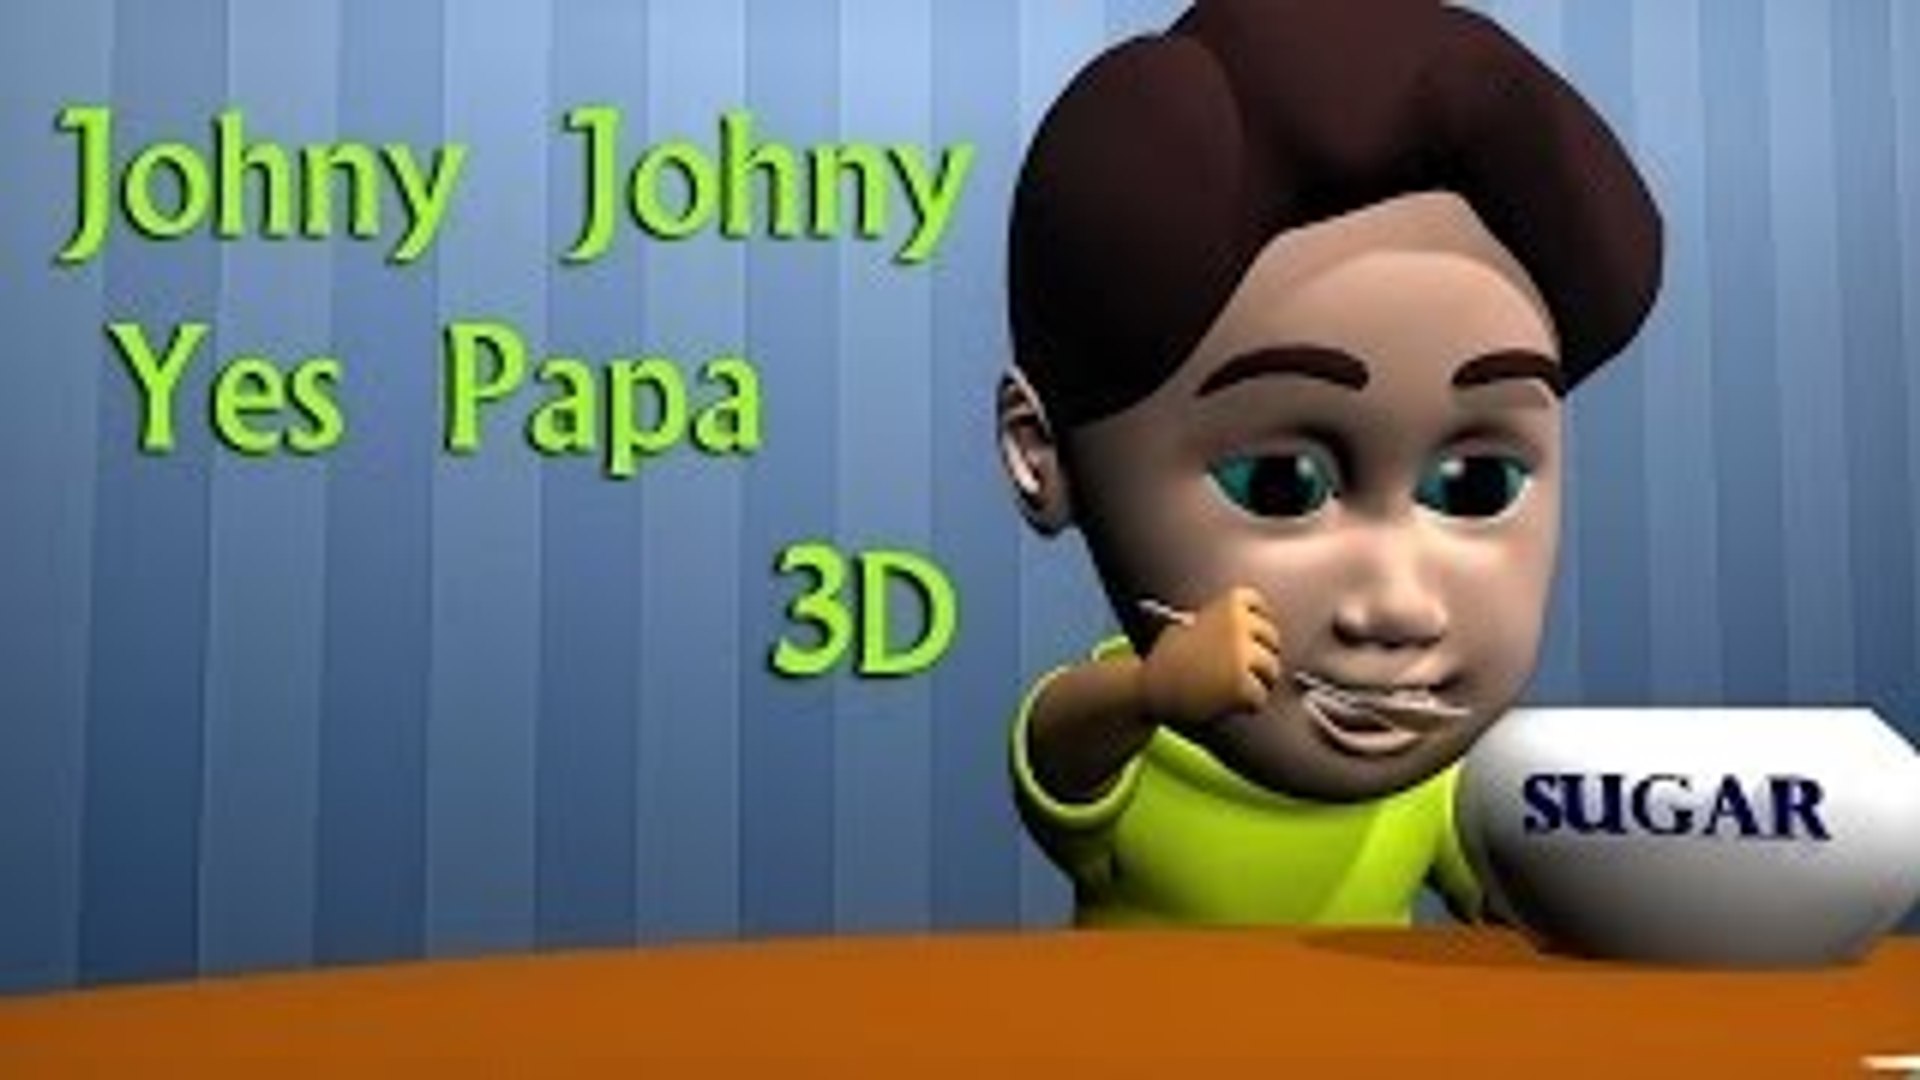 Johny Johny Yes Papa Cartoon Poem 3D | 3D Animated English Nursery Rhymes  For Kids With Ly - video Dailymotion